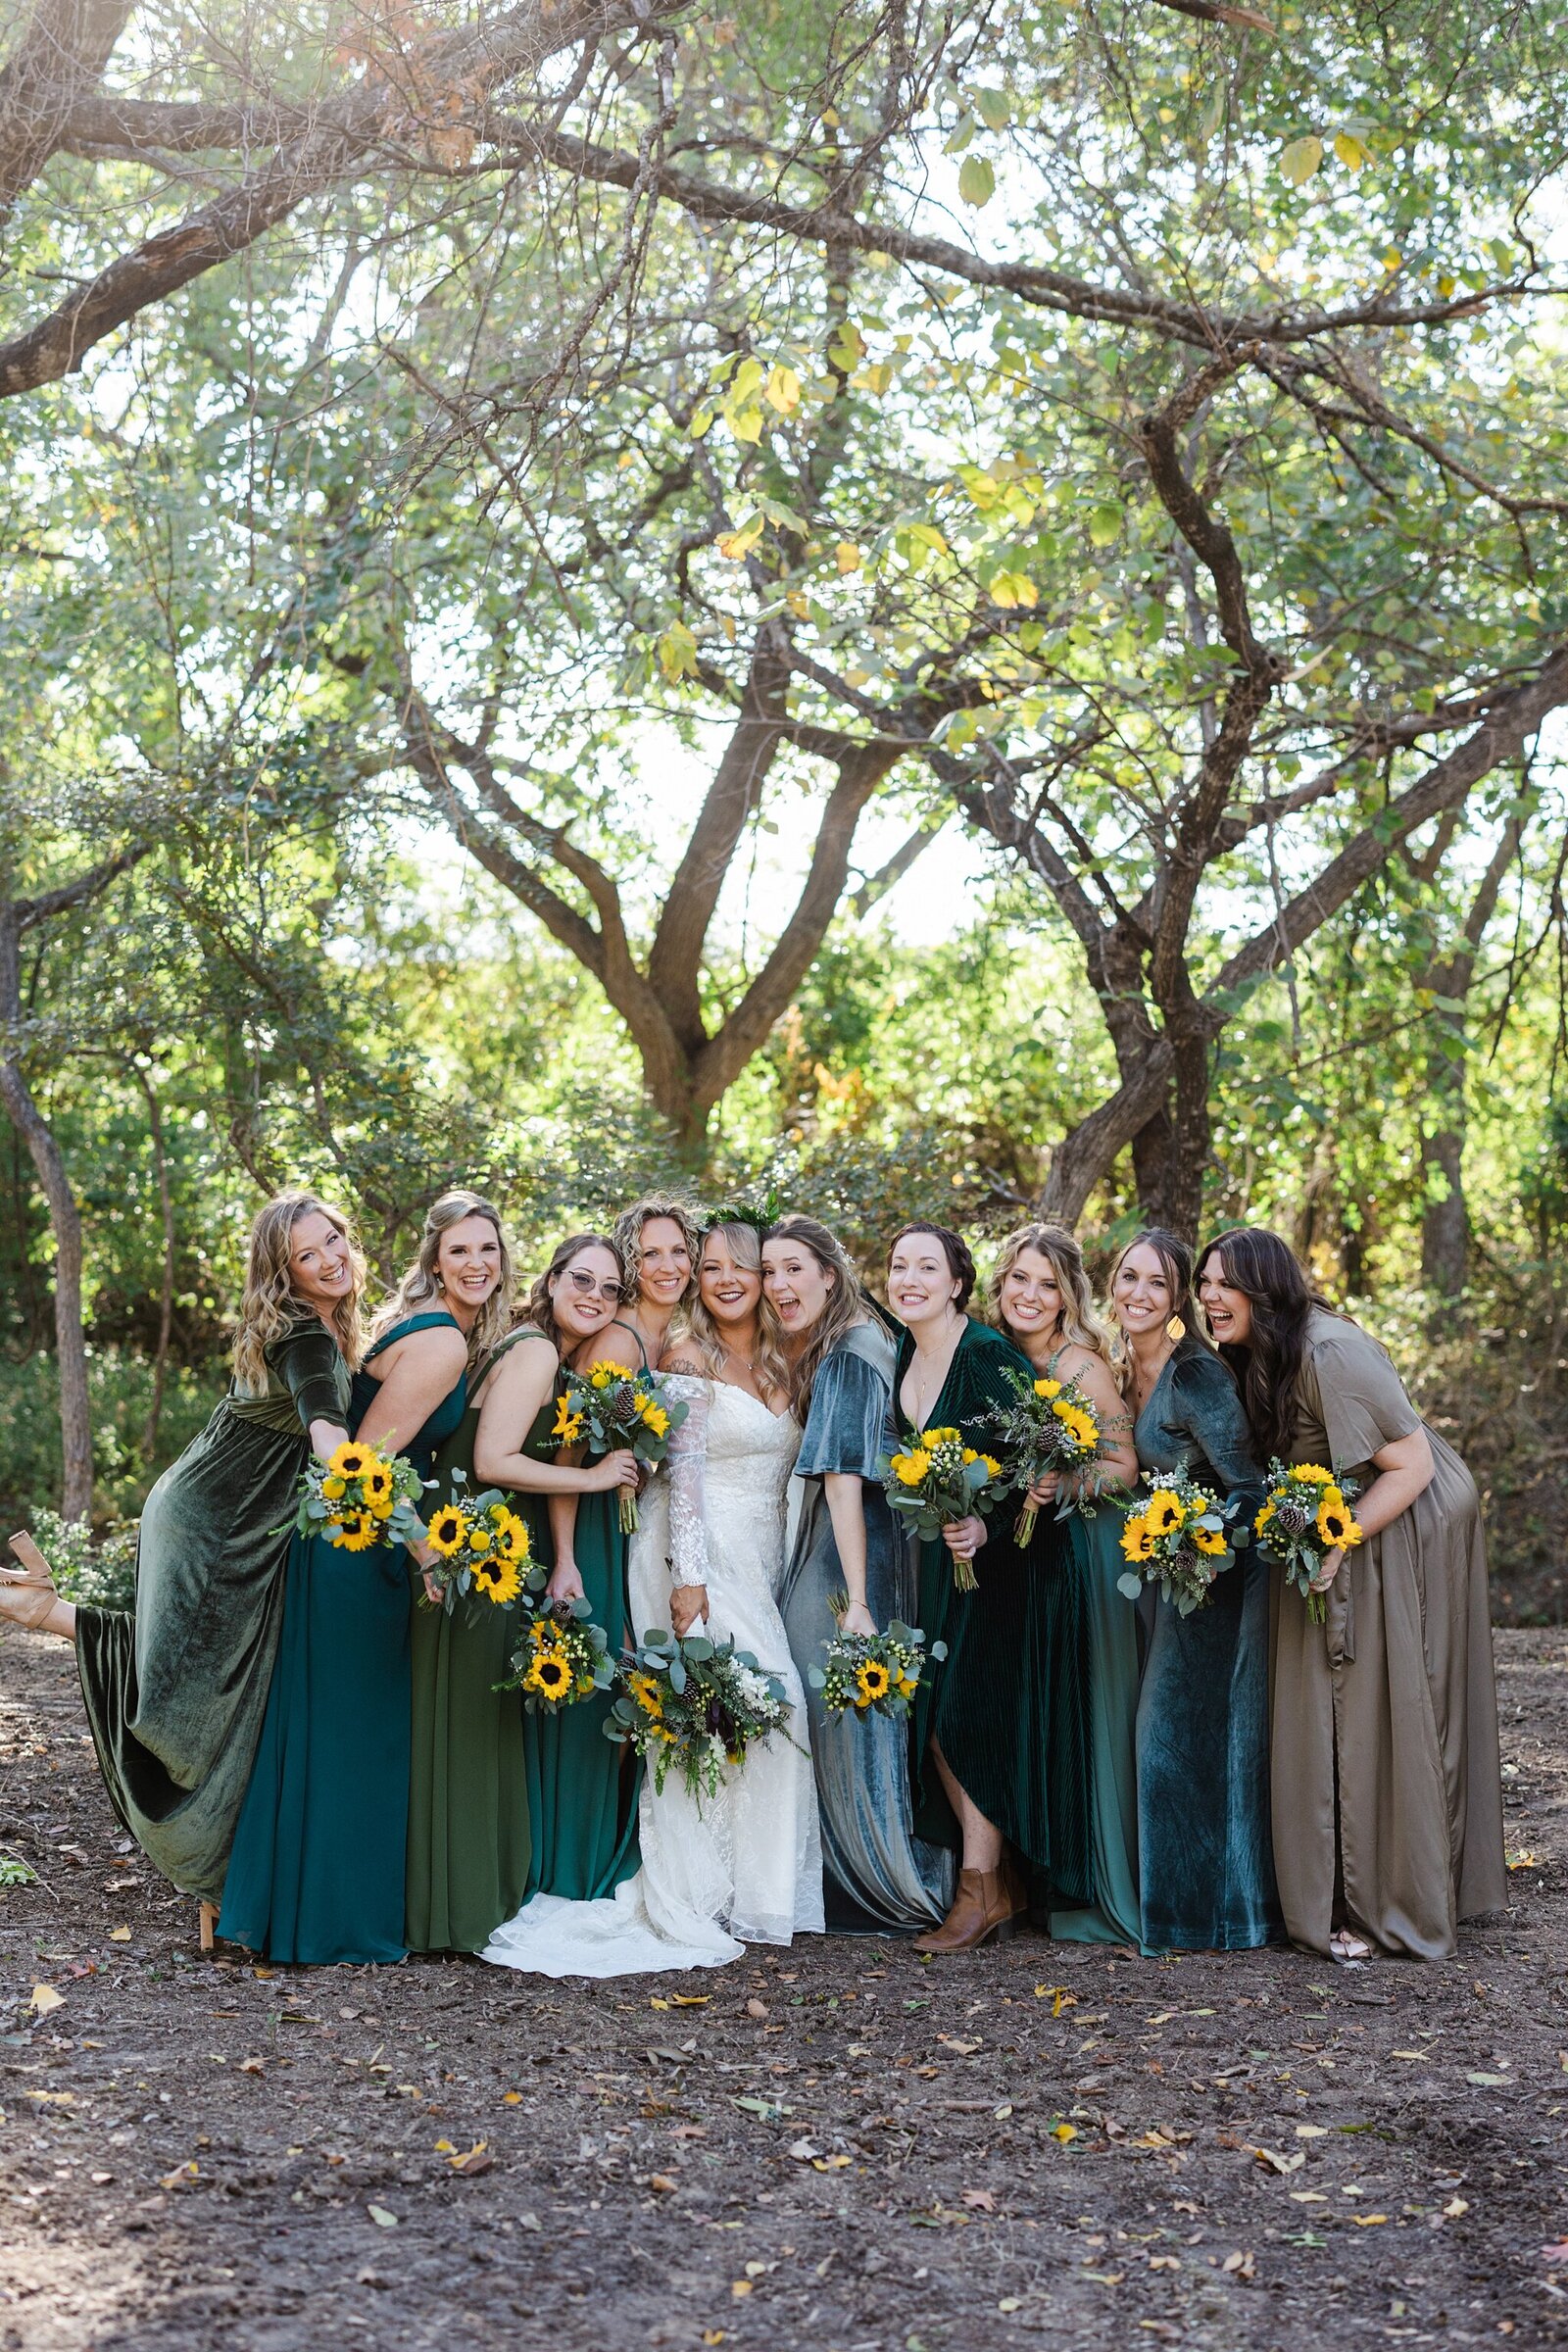 A bride posing very closely with all of her bridesmaids in a wooded setting where her ceremony took place. The bride is wearing a long white dress and a colorful flower crown while holding a bouquet. The bridesmaids are all wearing dresses of varying shades of blue and green while holding bouquets of sunflowers.